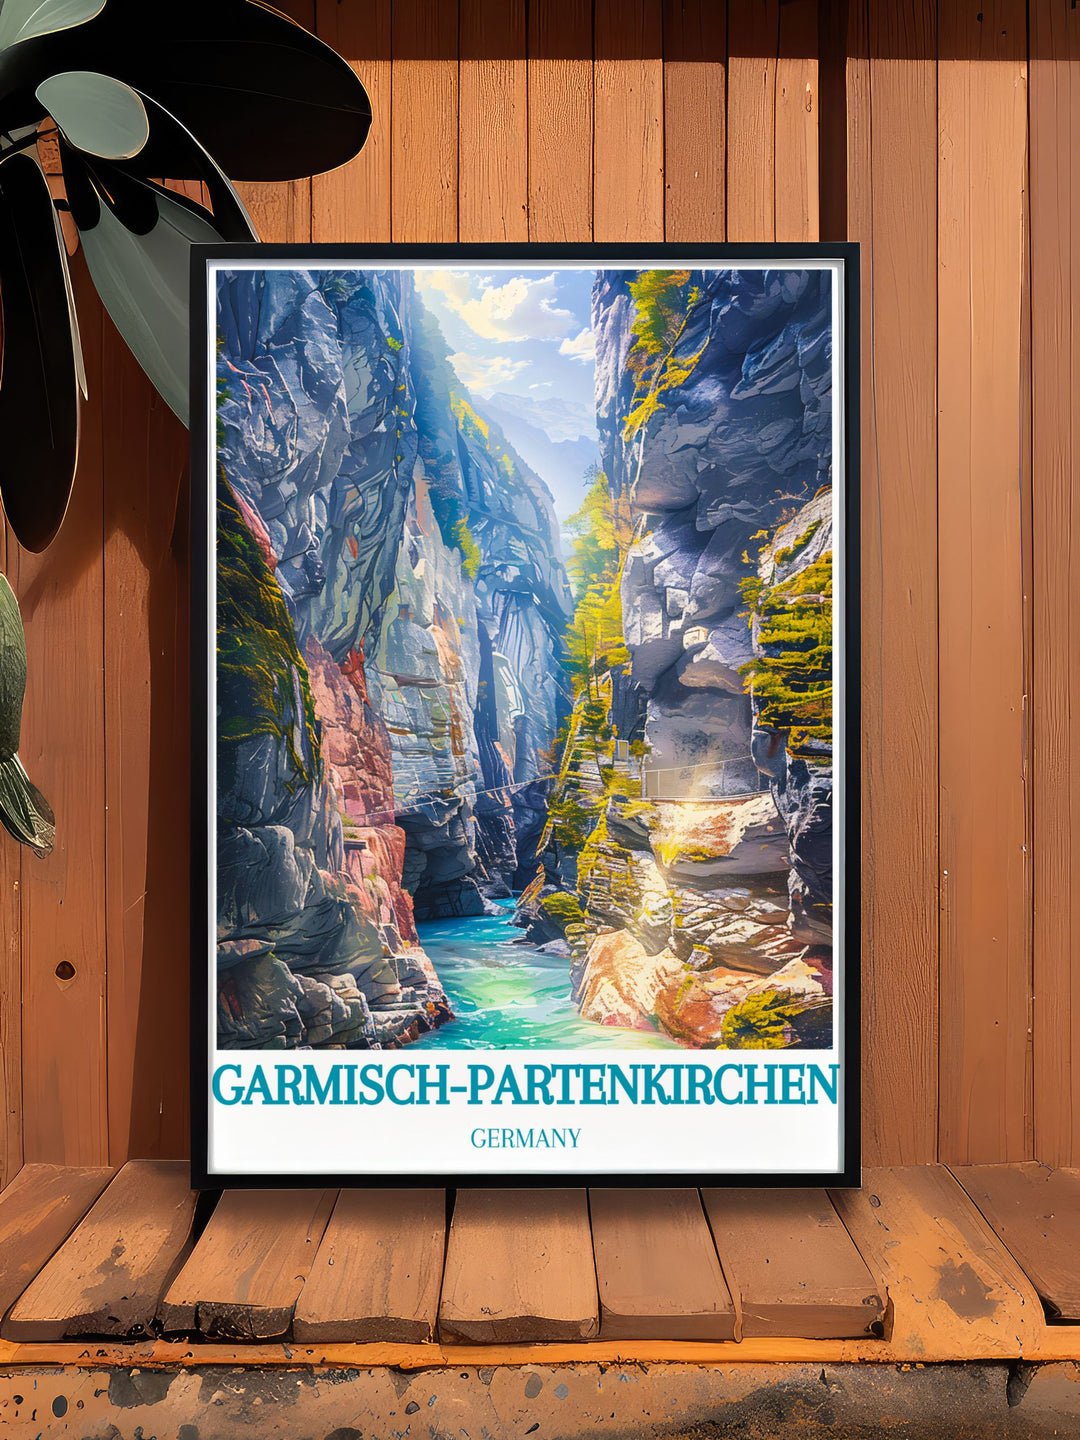 Scenic art piece of Garmisch Partenkirchen, emphasizing the towns rich cultural heritage, vibrant atmosphere, and picturesque alpine landscapes, perfect for adding a touch of Bavarian charm and history to any home decor.